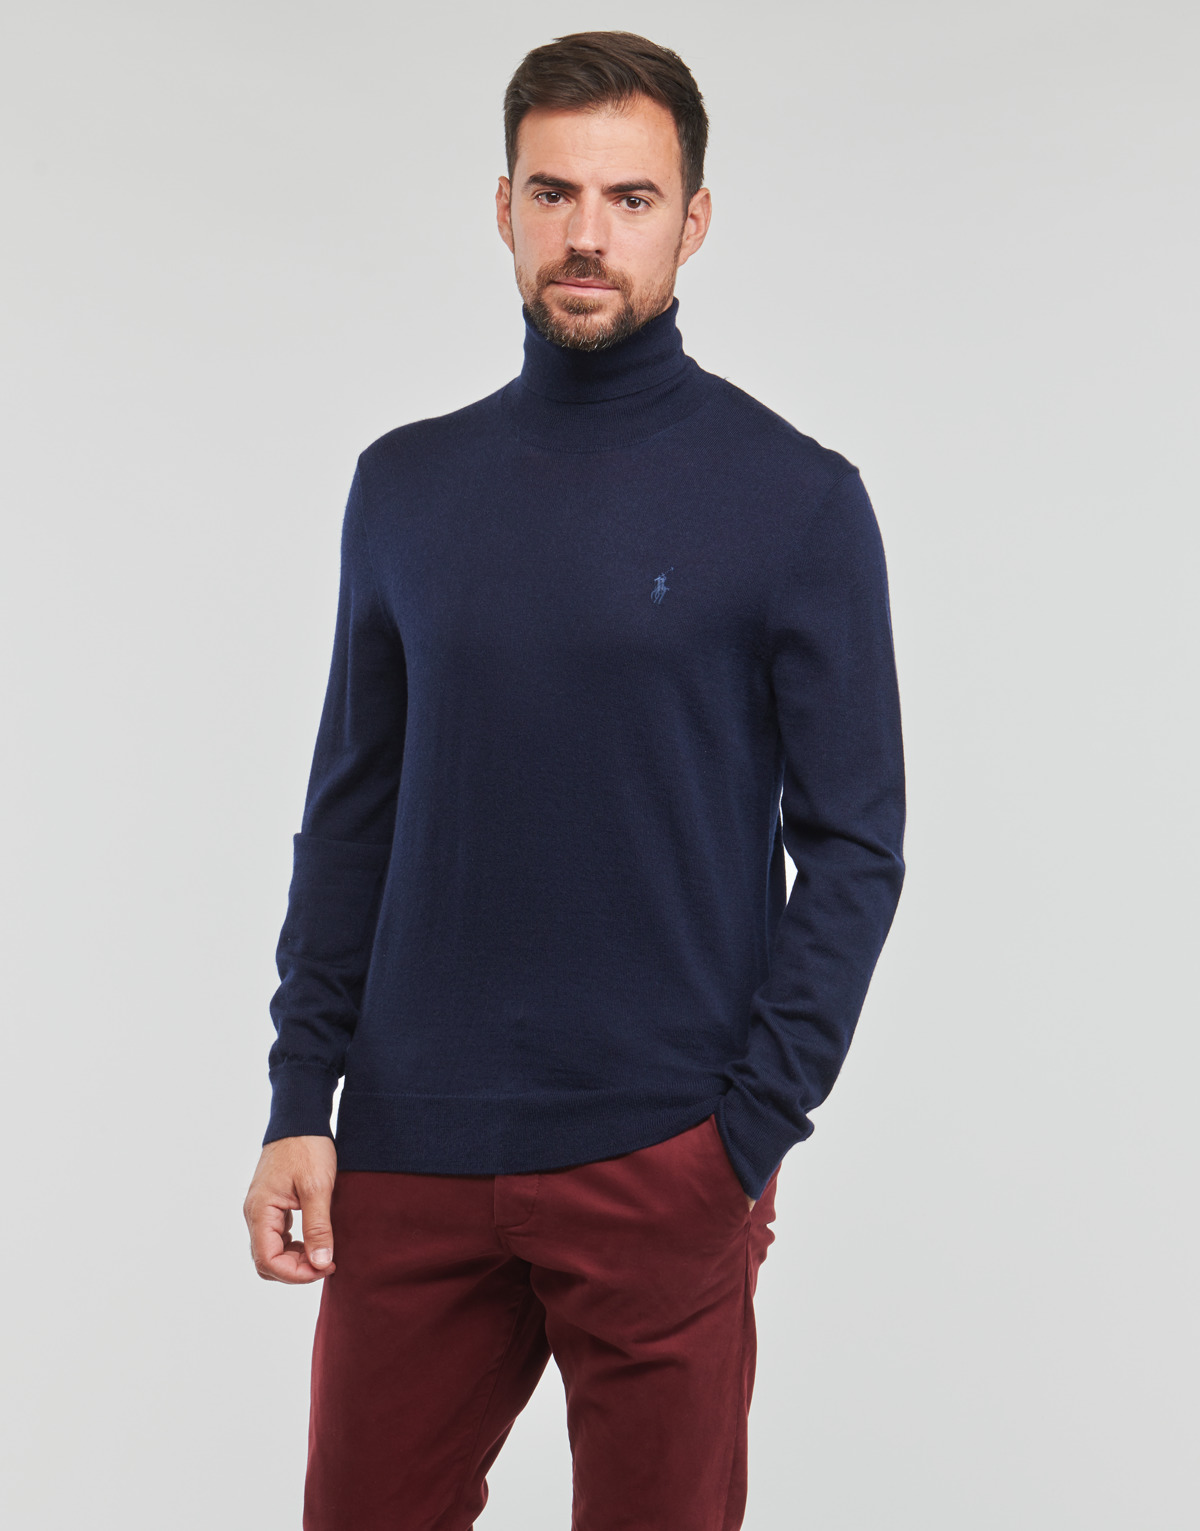 Vêtements Homme dept_Clothing Grey cups polo-shirts S224SC05-LS TN PP-LONG SLEEVE-PULLOVER Marine / Hunter Navy